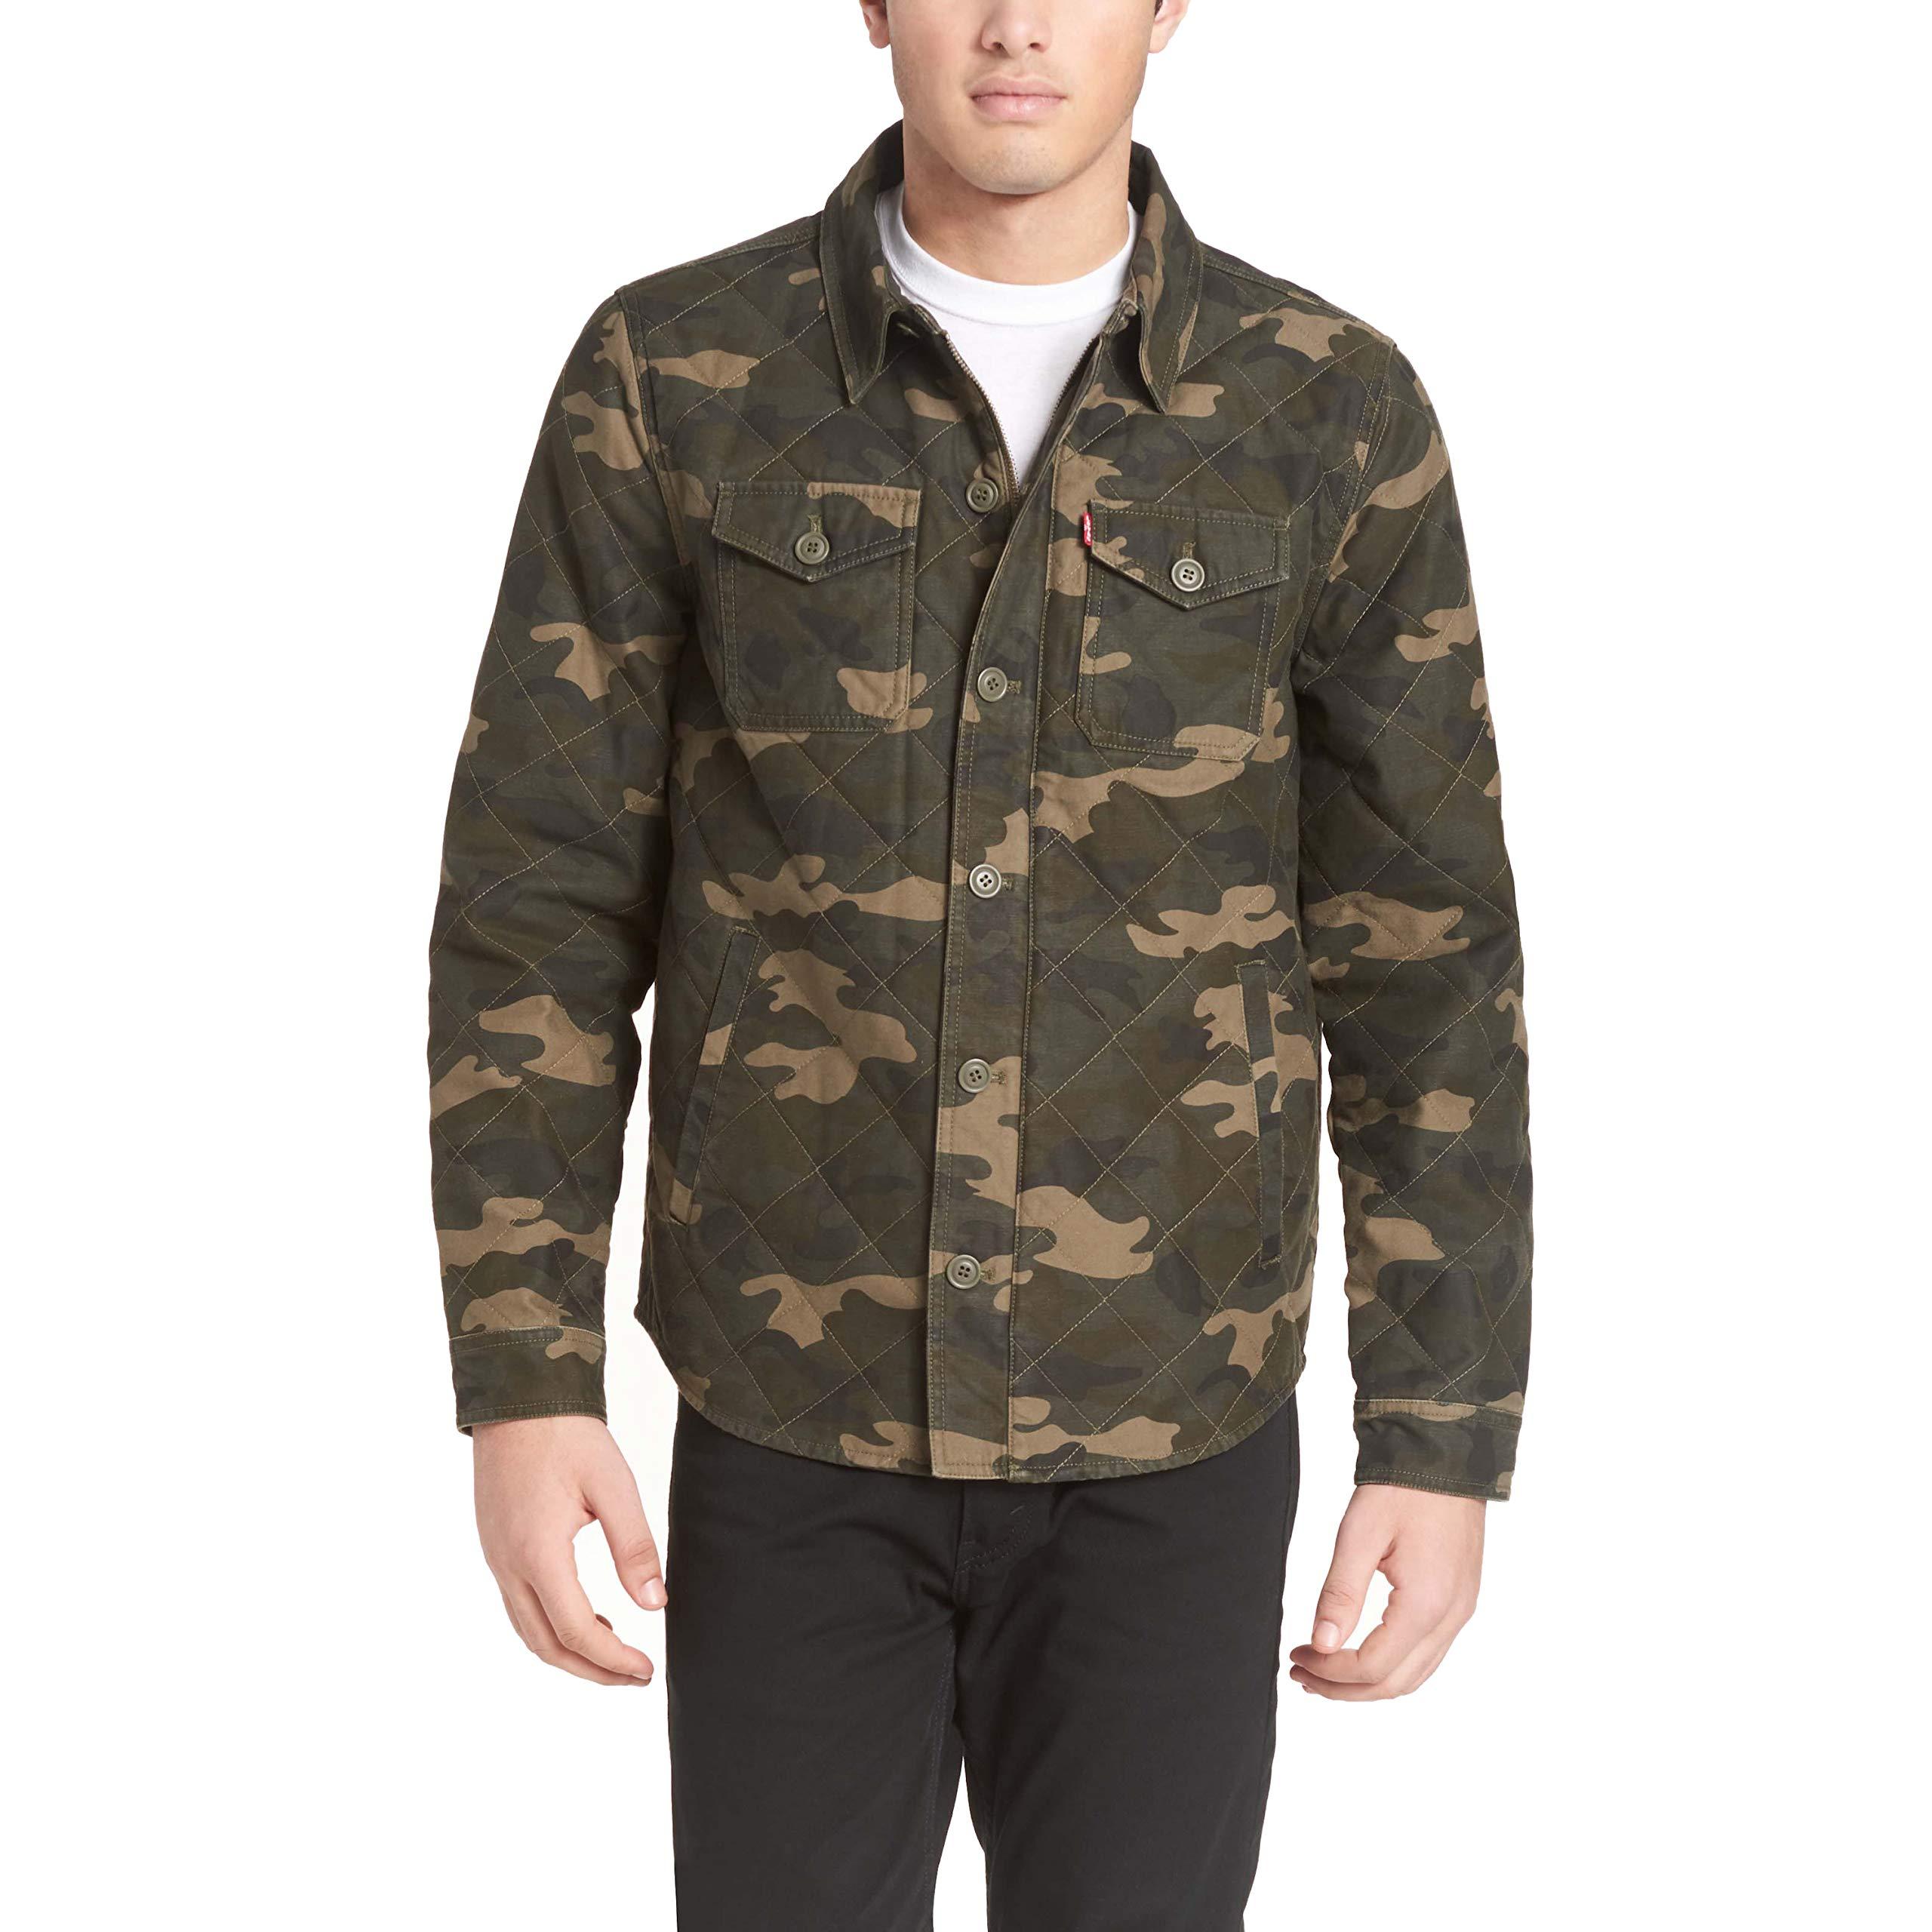 Levi's Stretch Cotton Diamond Quilted Shirt Jacket in Camouflage (Green)  for Men - Lyst